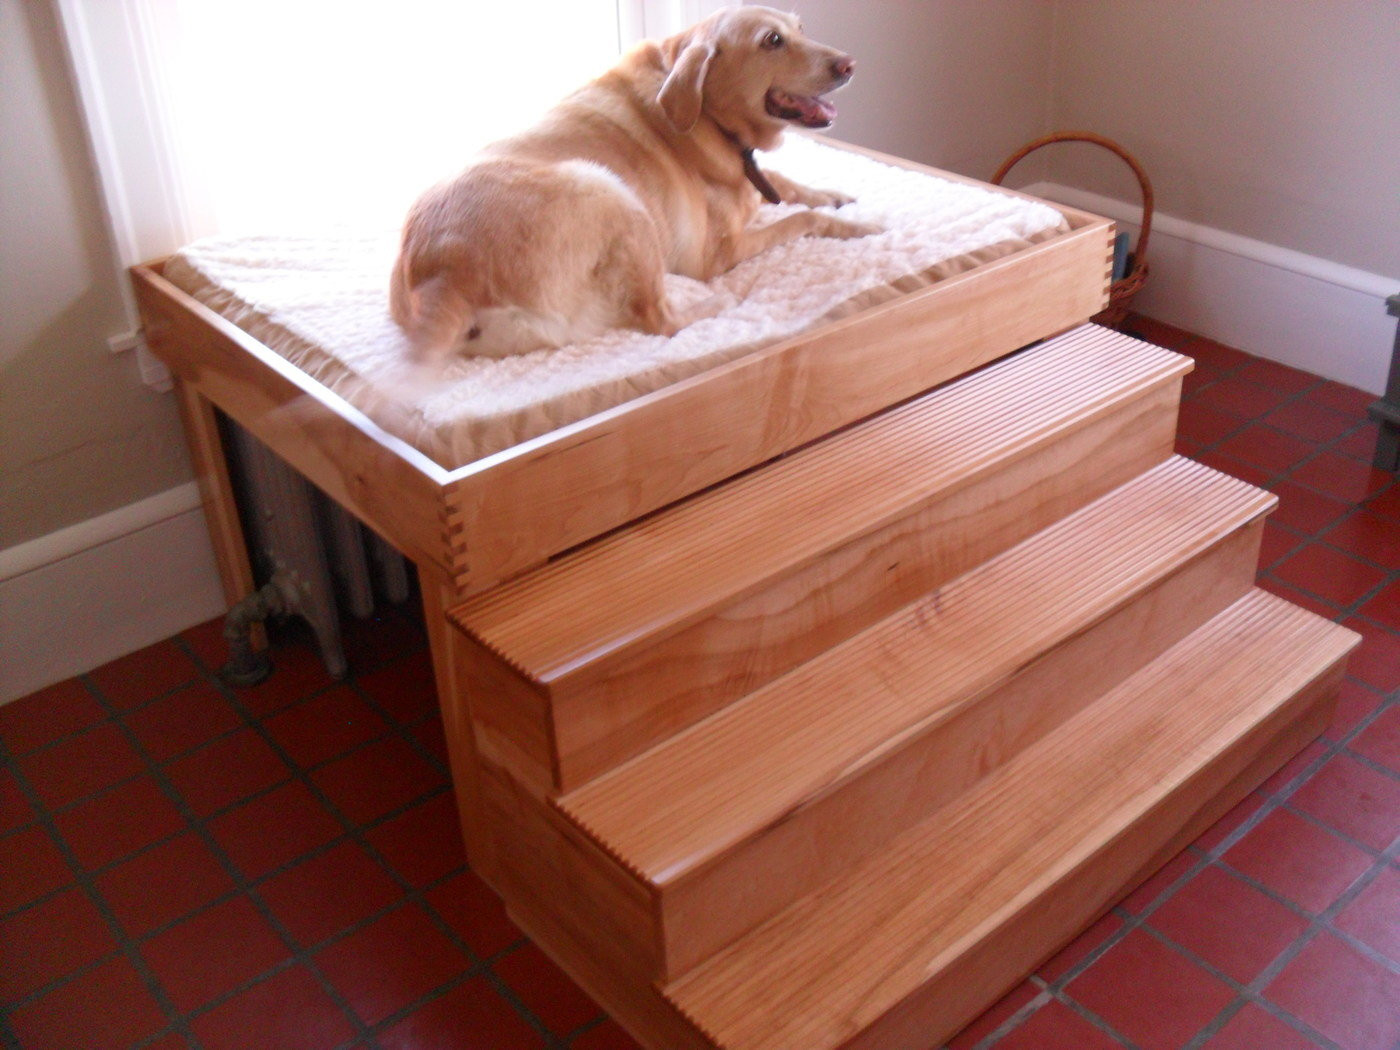 DIY Elevated Dog Bed
 Elevated dog bed by Anthony Saporiti at Coroflot